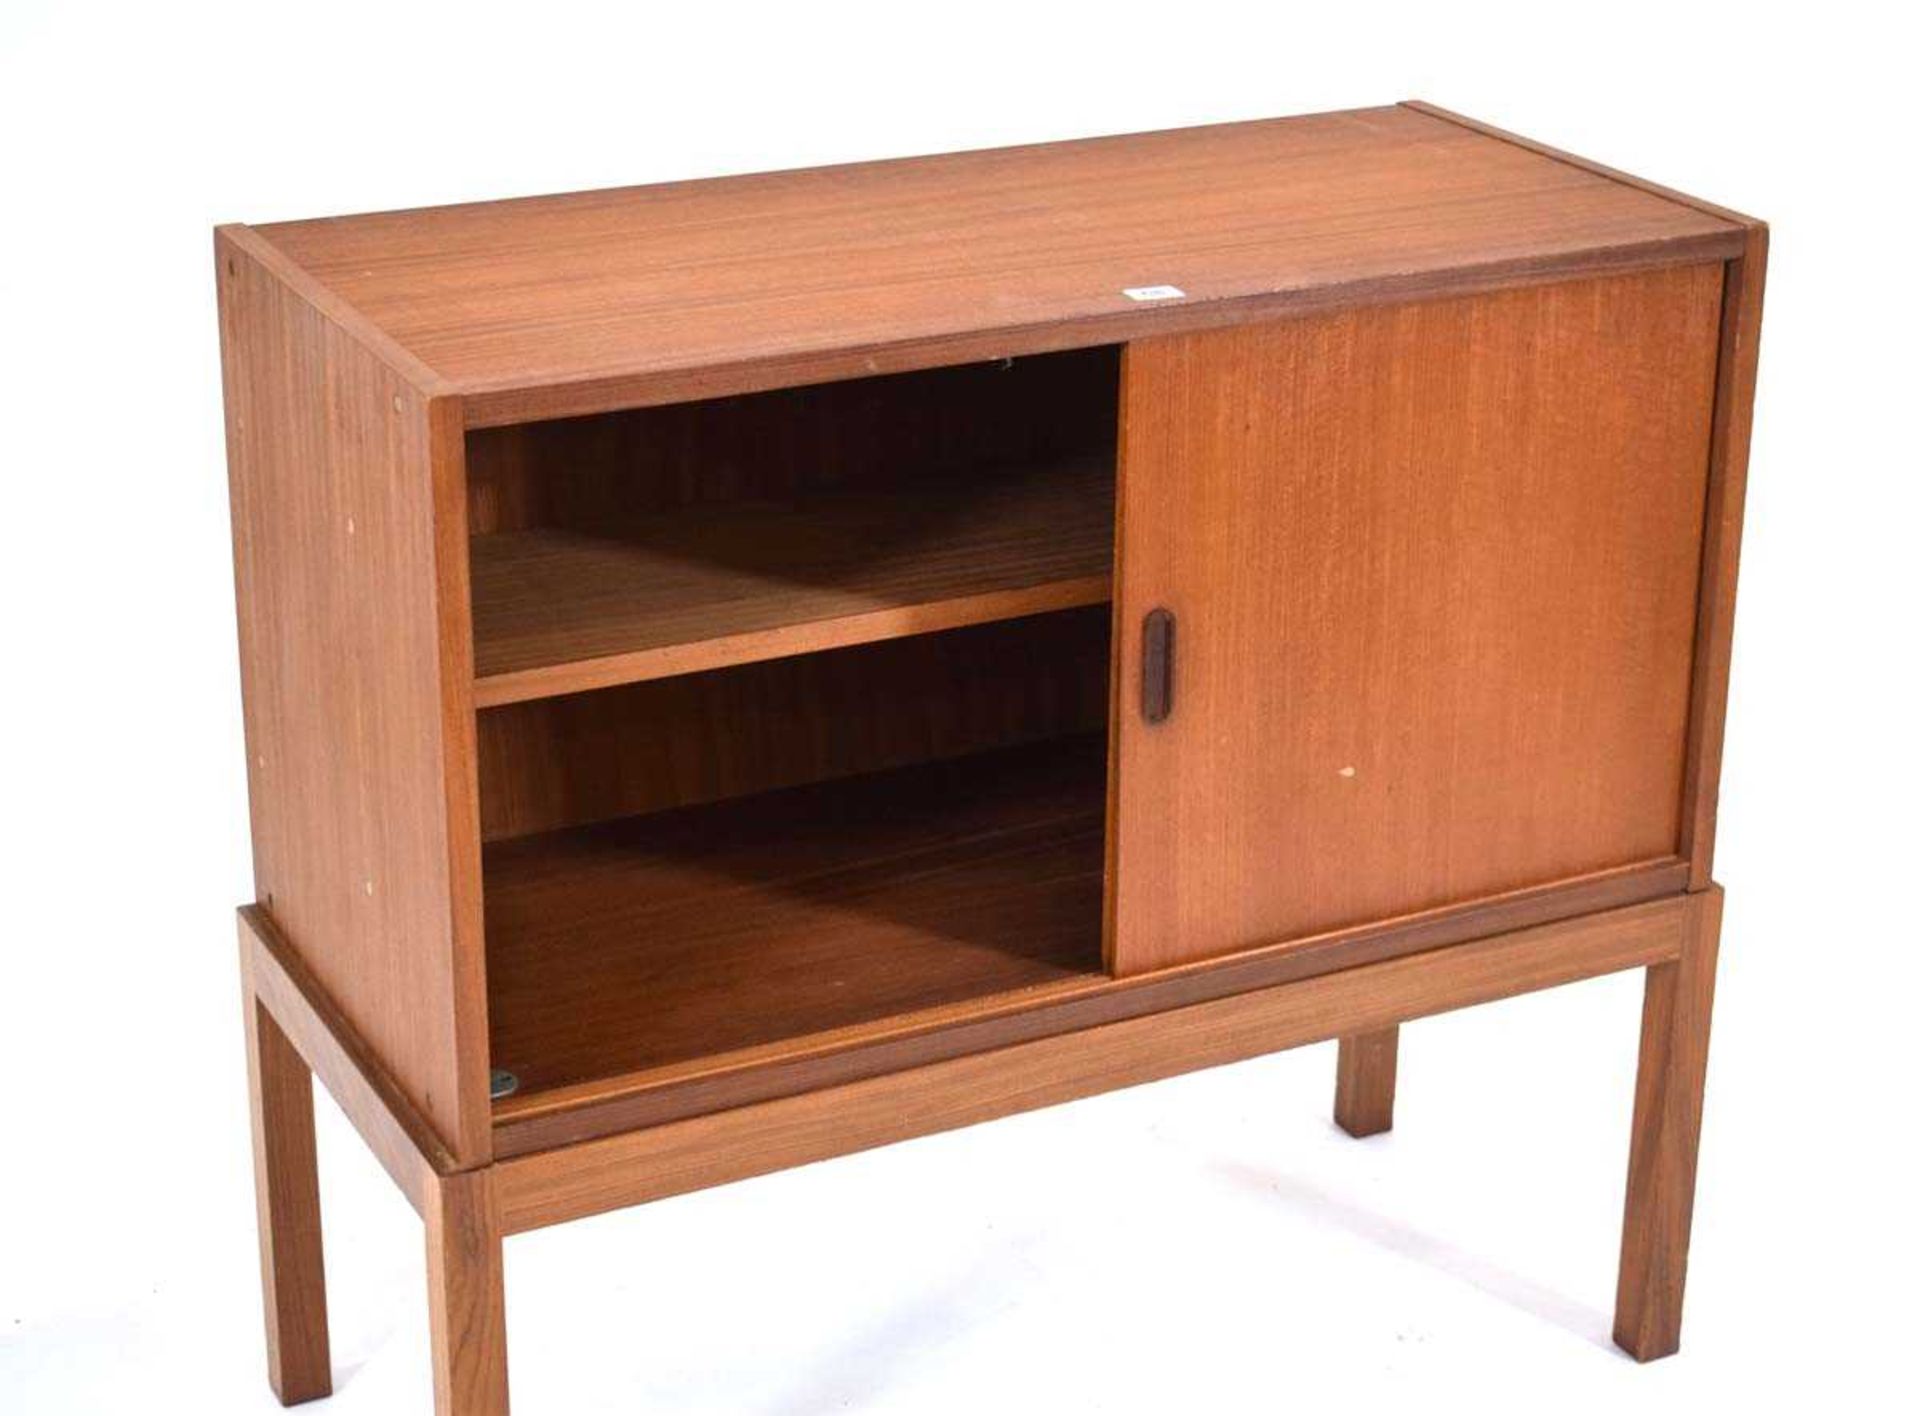 A 1970's teak cabinet with two sliding doors on square legs, 89 x 40 x 43 cm - Image 3 of 3